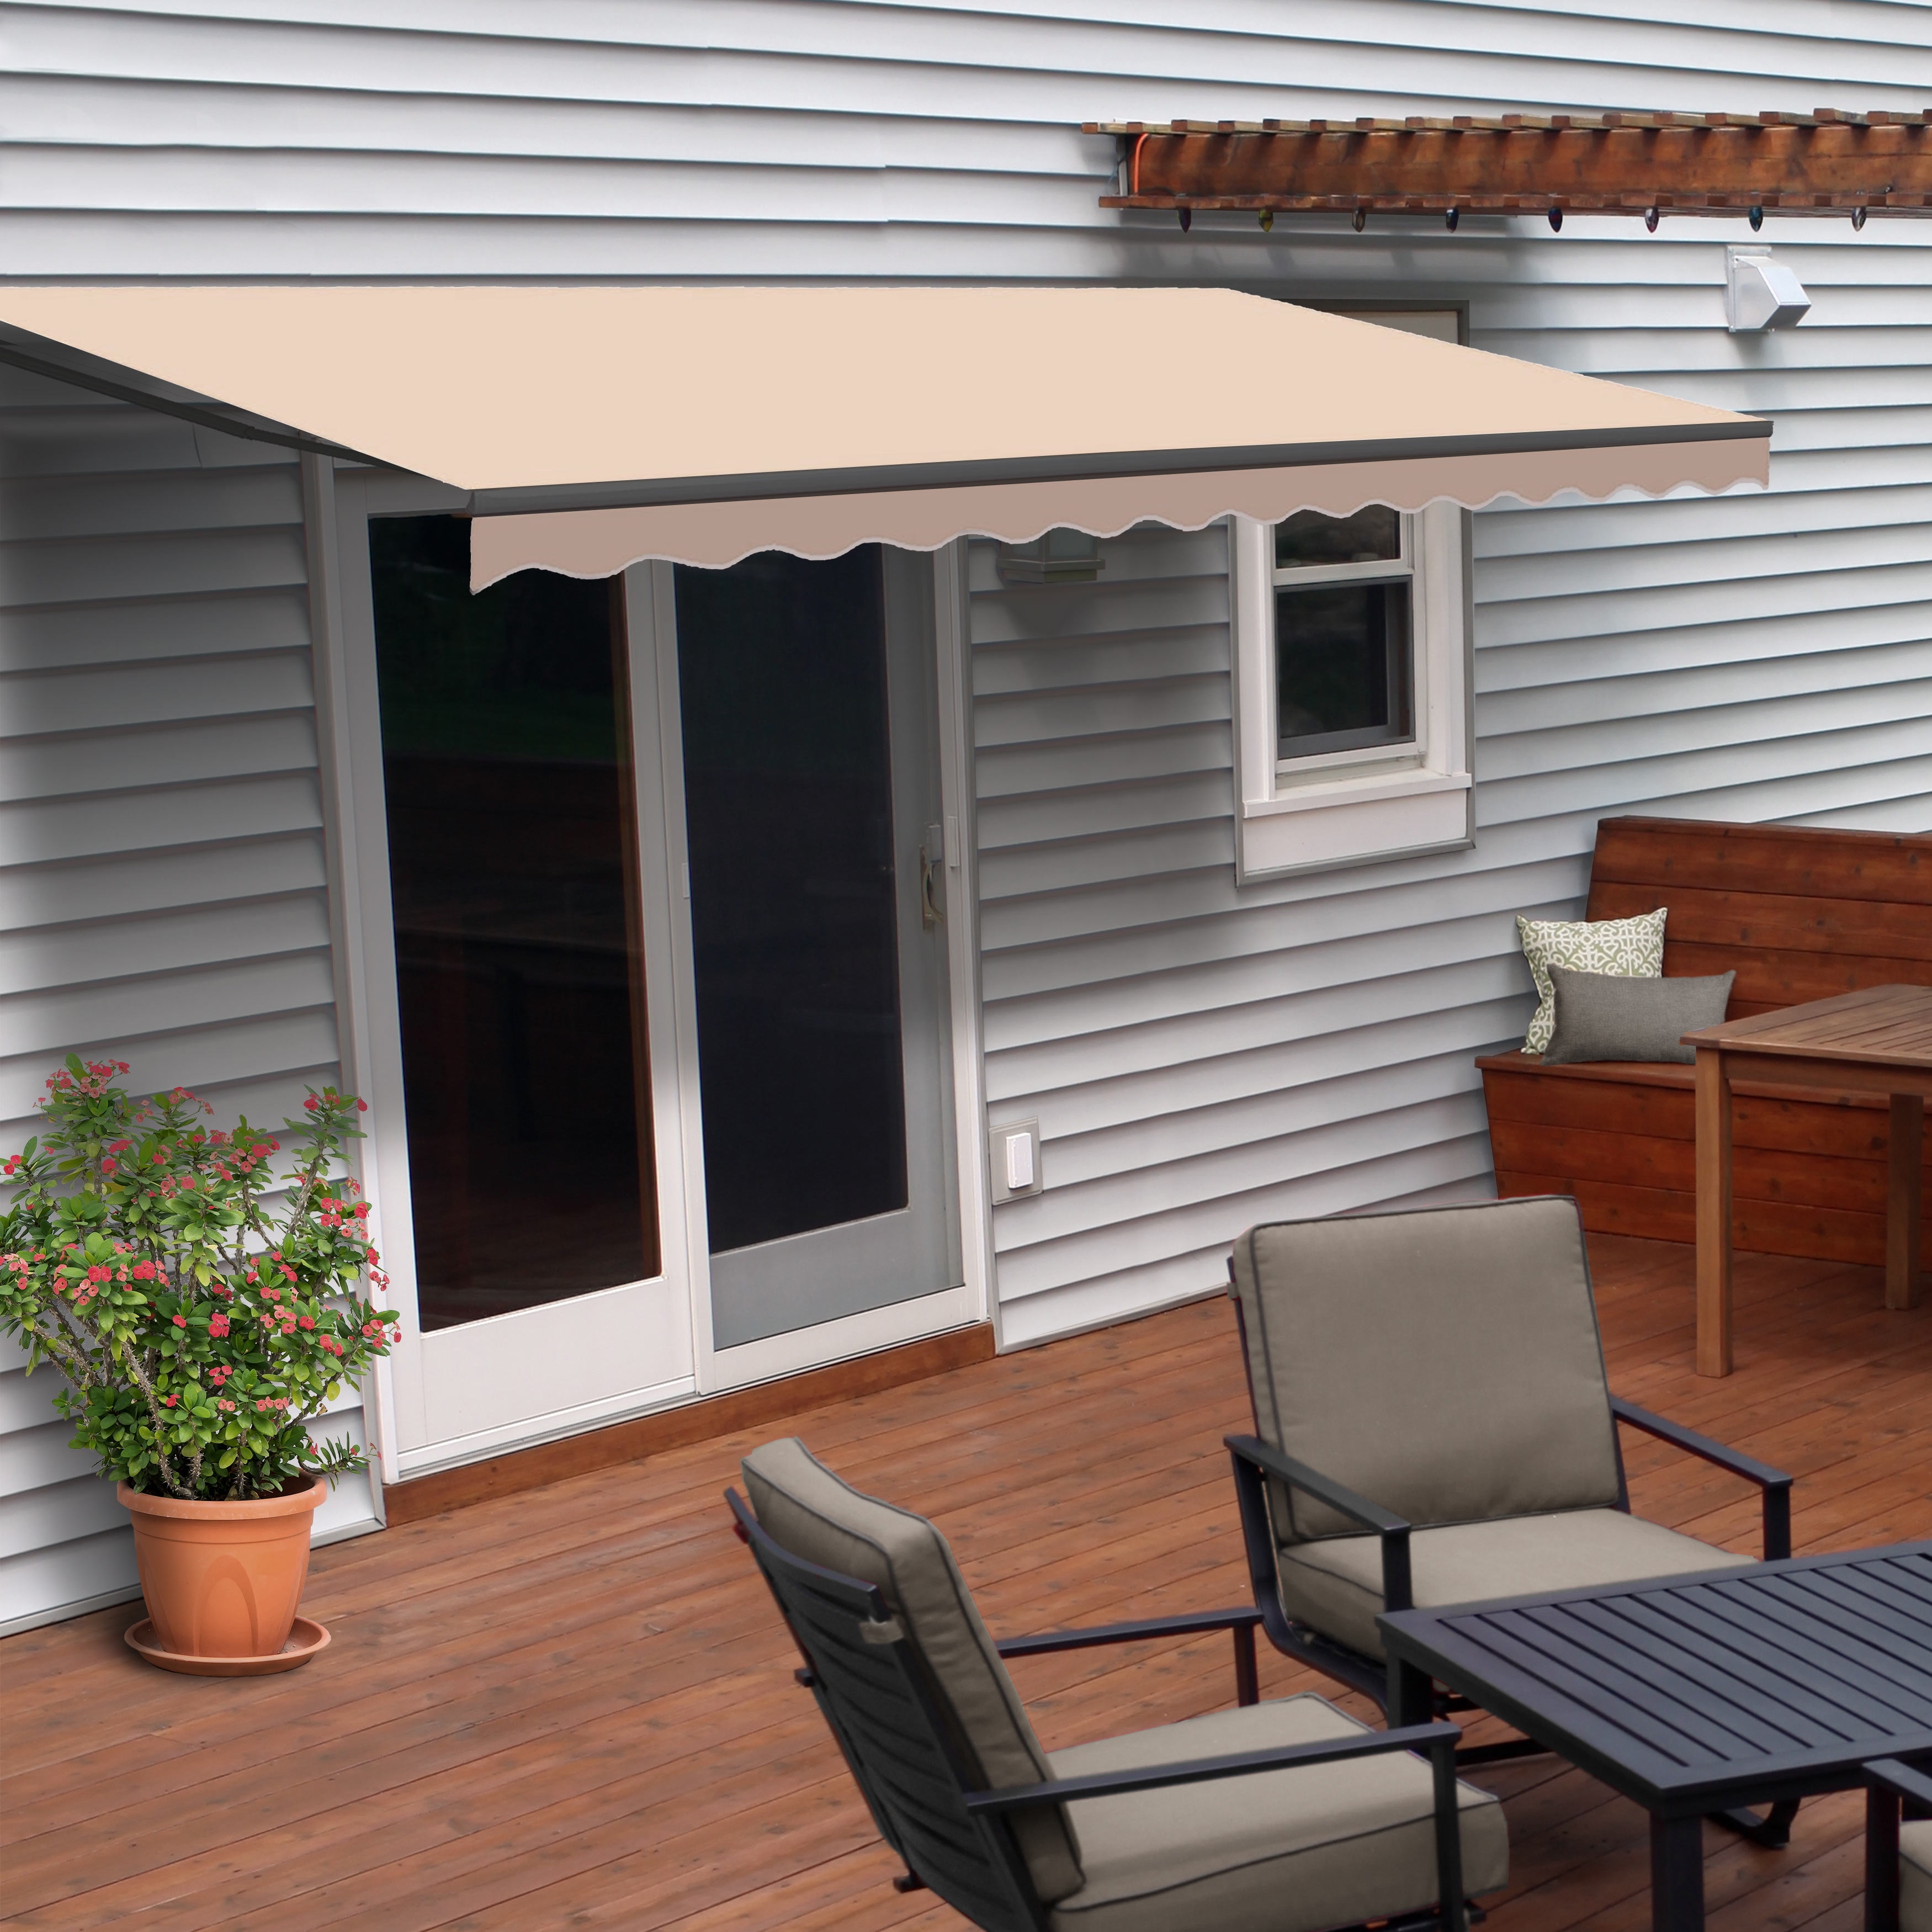 Balcony UV Protection and Water-Resistant Fabric DRIPEX 8'x6.5' Manual Retractable Patio Awning Sun Shade Awning Cover Outdoor Patio Canopy Sunsetter Deck Awnings with Crank Handle Grey